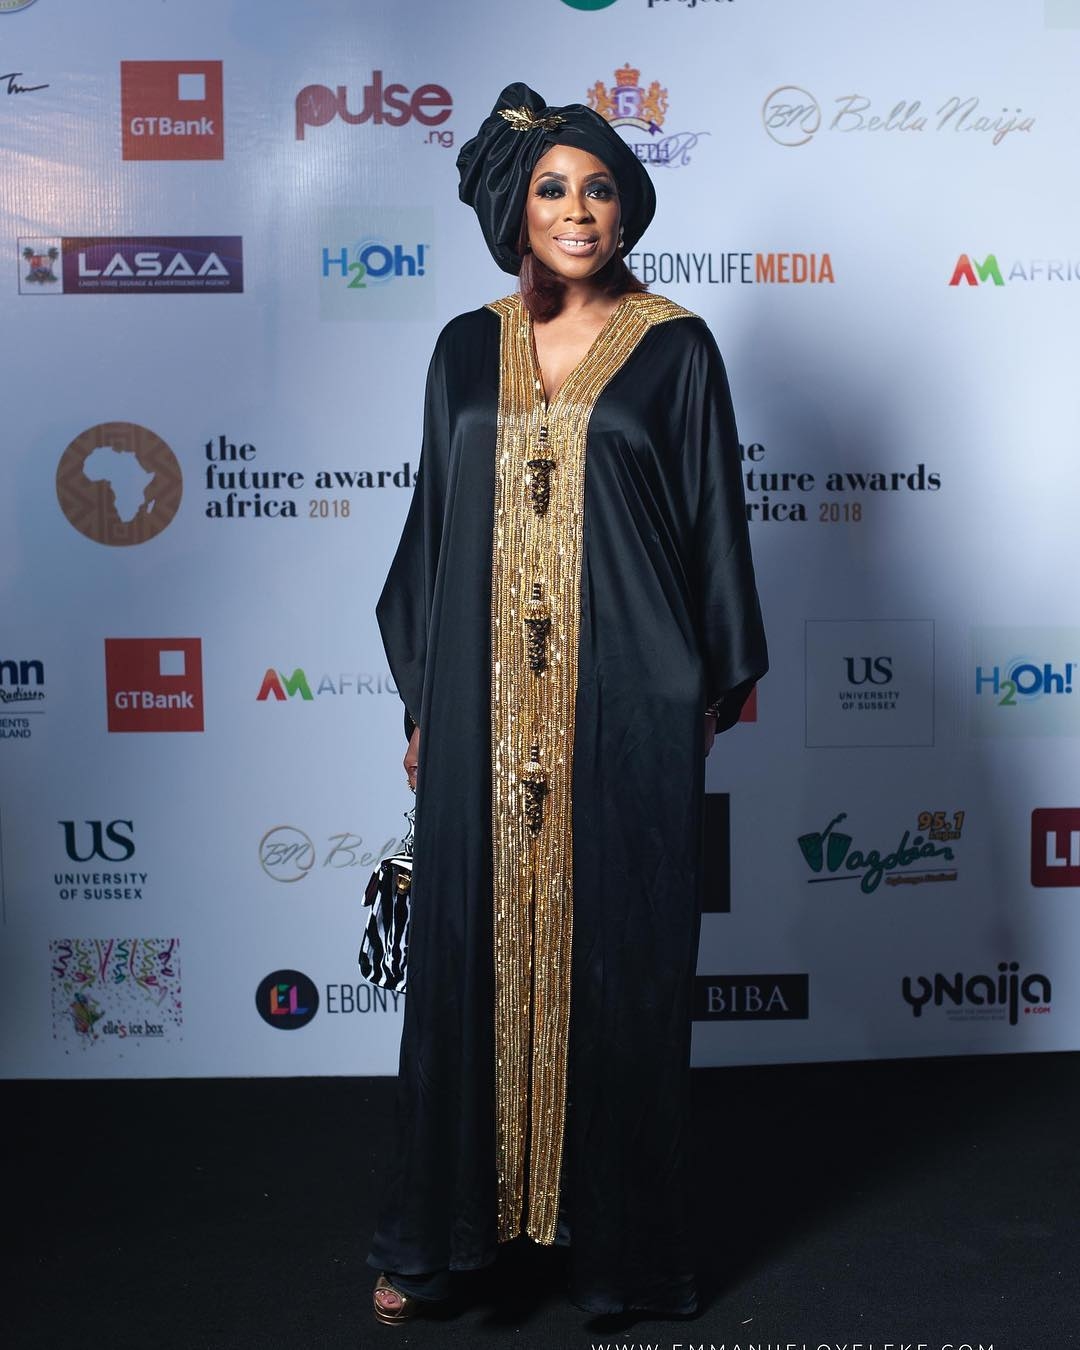 The Future Awards Africa 2018